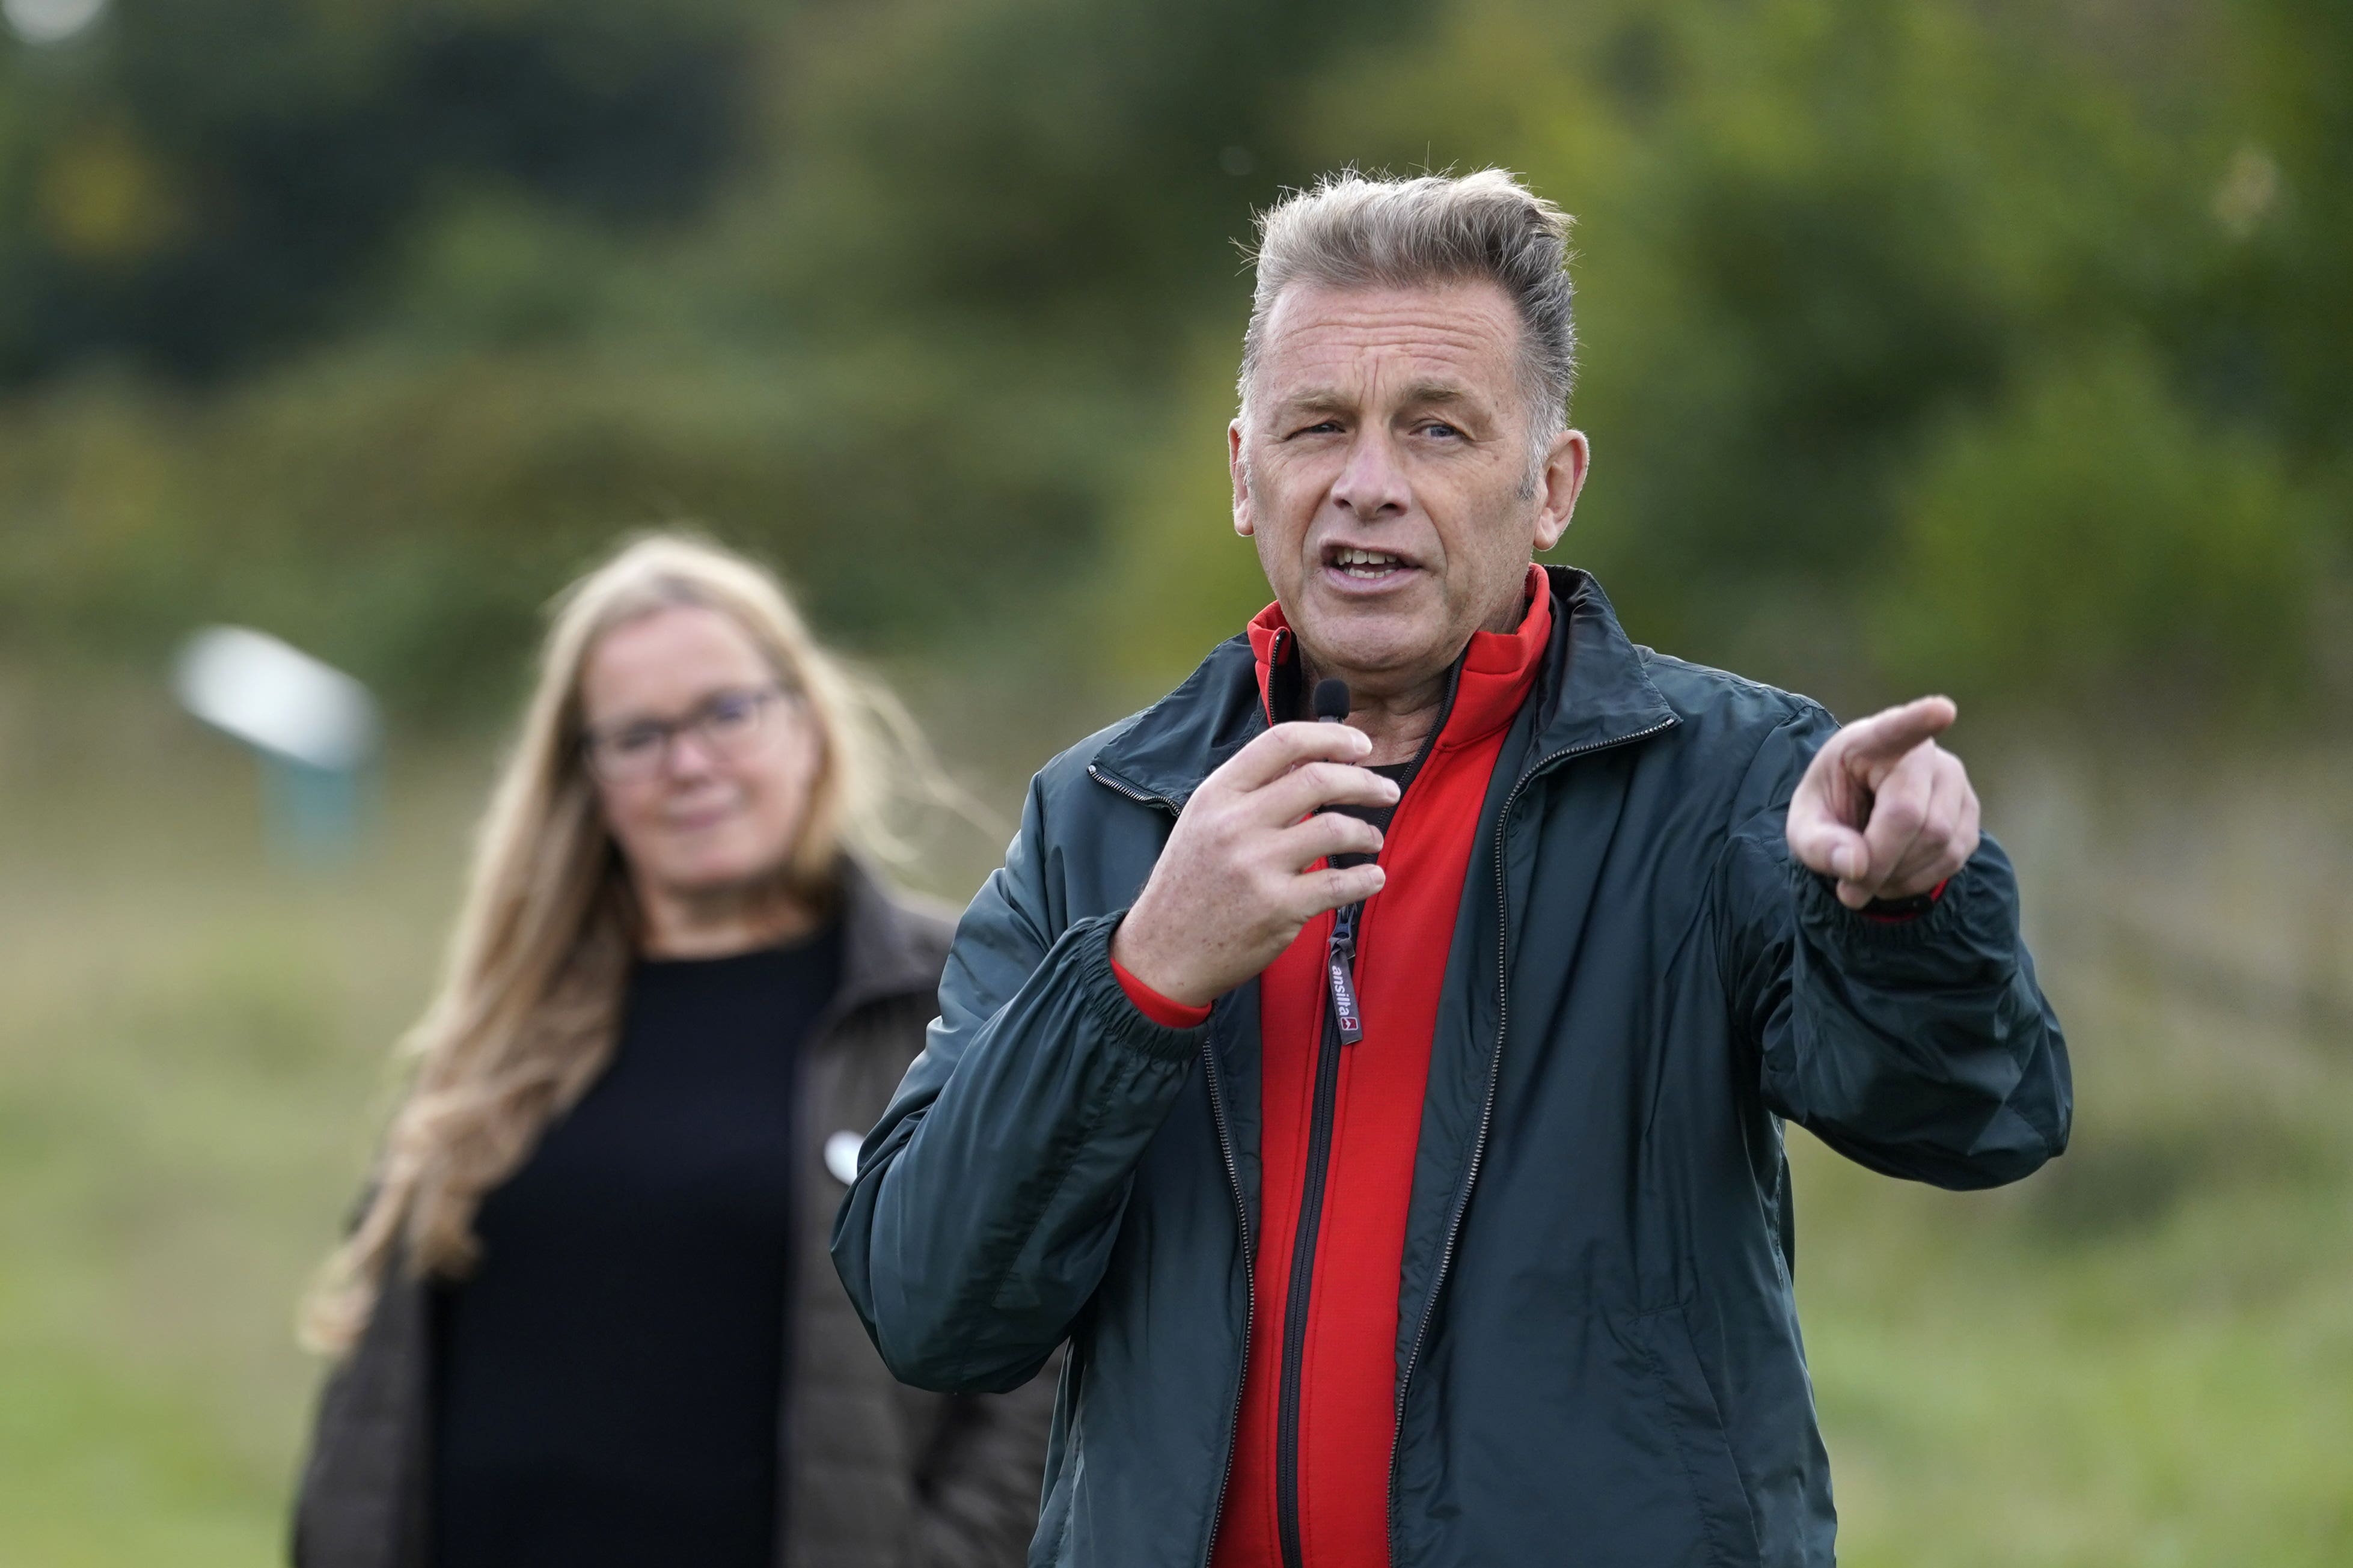 Conservationist Chris Packham gives a speech to wildlife supporters during a conversation about nature at Bassetts Mead country park, near Hook in Hampshire (Andrew Matthews/PA)